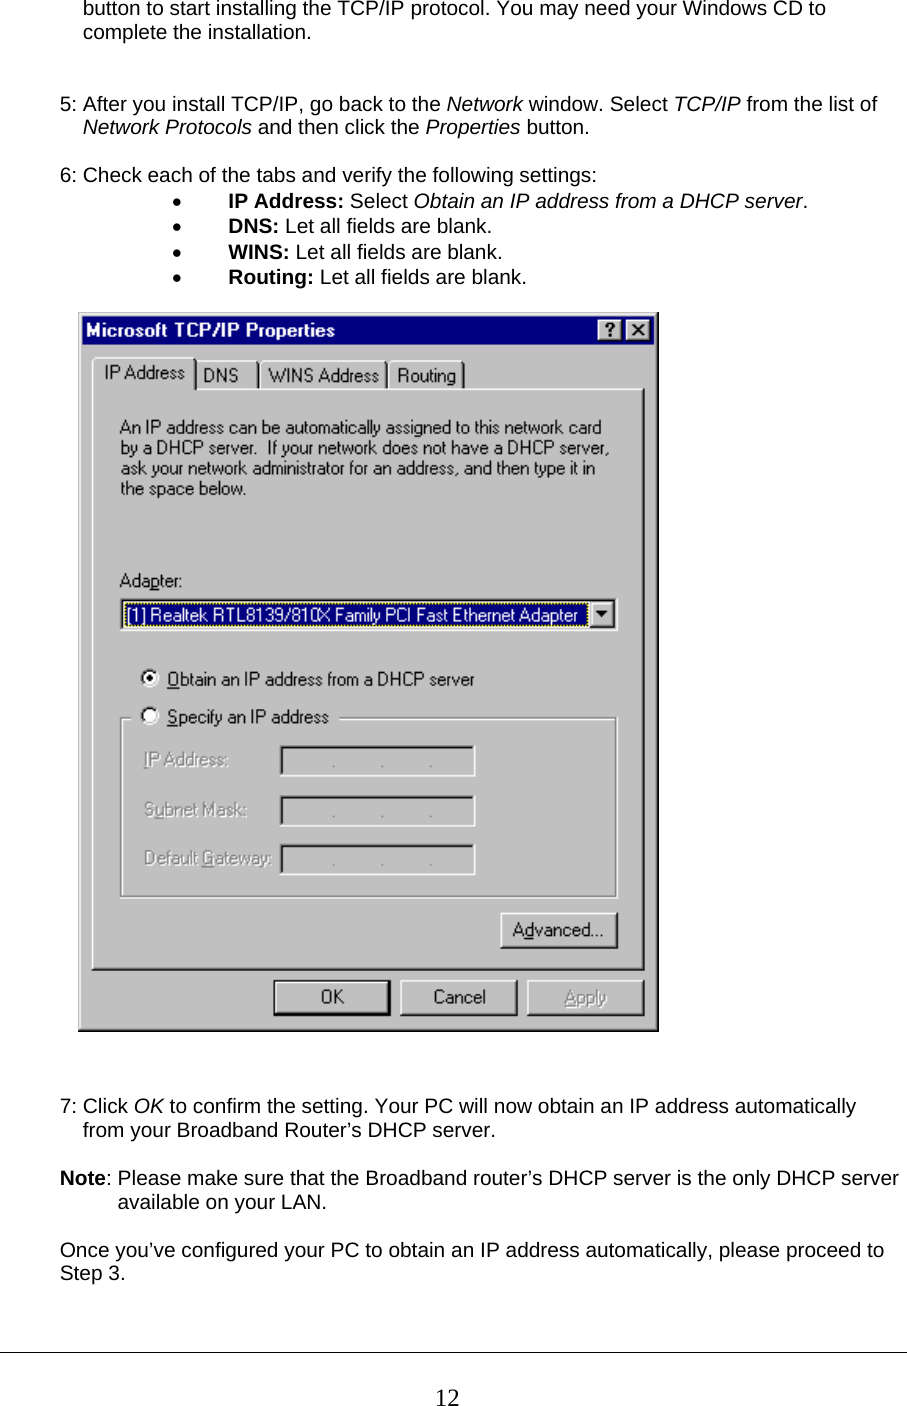     button to start installing the TCP/IP protocol. You may need your Windows CD to      complete the installation.   5: After you install TCP/IP, go back to the Network window. Select TCP/IP from the list of      Network Protocols and then click the Properties button.  6: Check each of the tabs and verify the following settings: • IP Address: Select Obtain an IP address from a DHCP server. • DNS: Let all fields are blank. • WINS: Let all fields are blank. • Routing: Let all fields are blank.     7: Click OK to confirm the setting. Your PC will now obtain an IP address automatically     from your Broadband Router’s DHCP server.  Note: Please make sure that the Broadband router’s DHCP server is the only DHCP server            available on your LAN.  Once you’ve configured your PC to obtain an IP address automatically, please proceed to  Step 3.    12